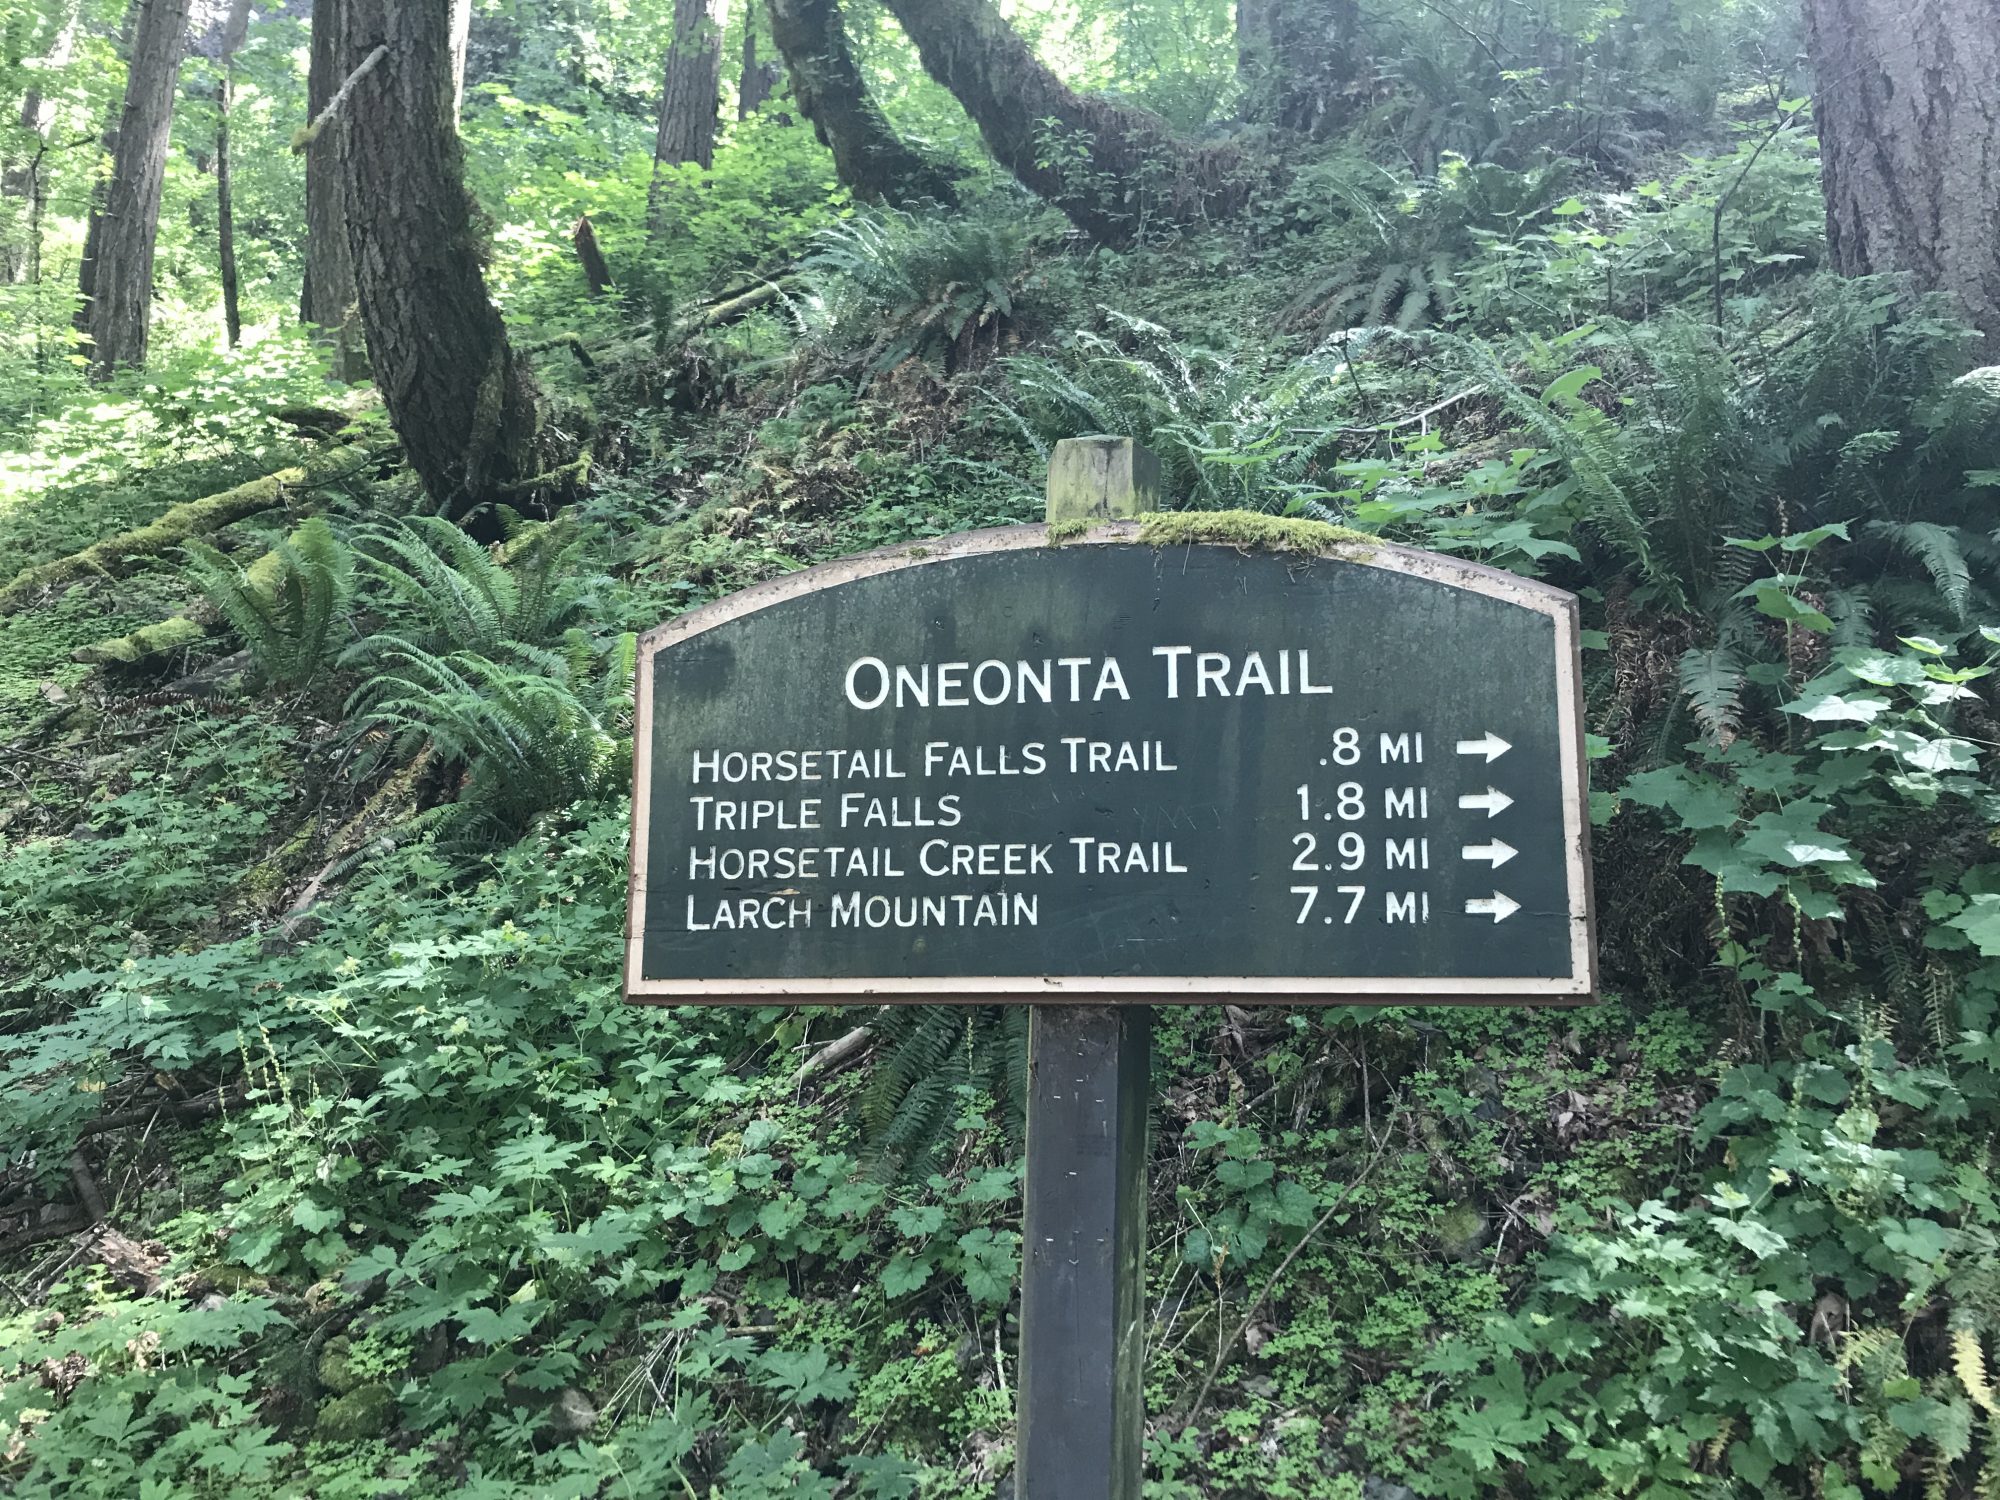 trailhead sign of the Oneonta Trail and directions (Portland OR)